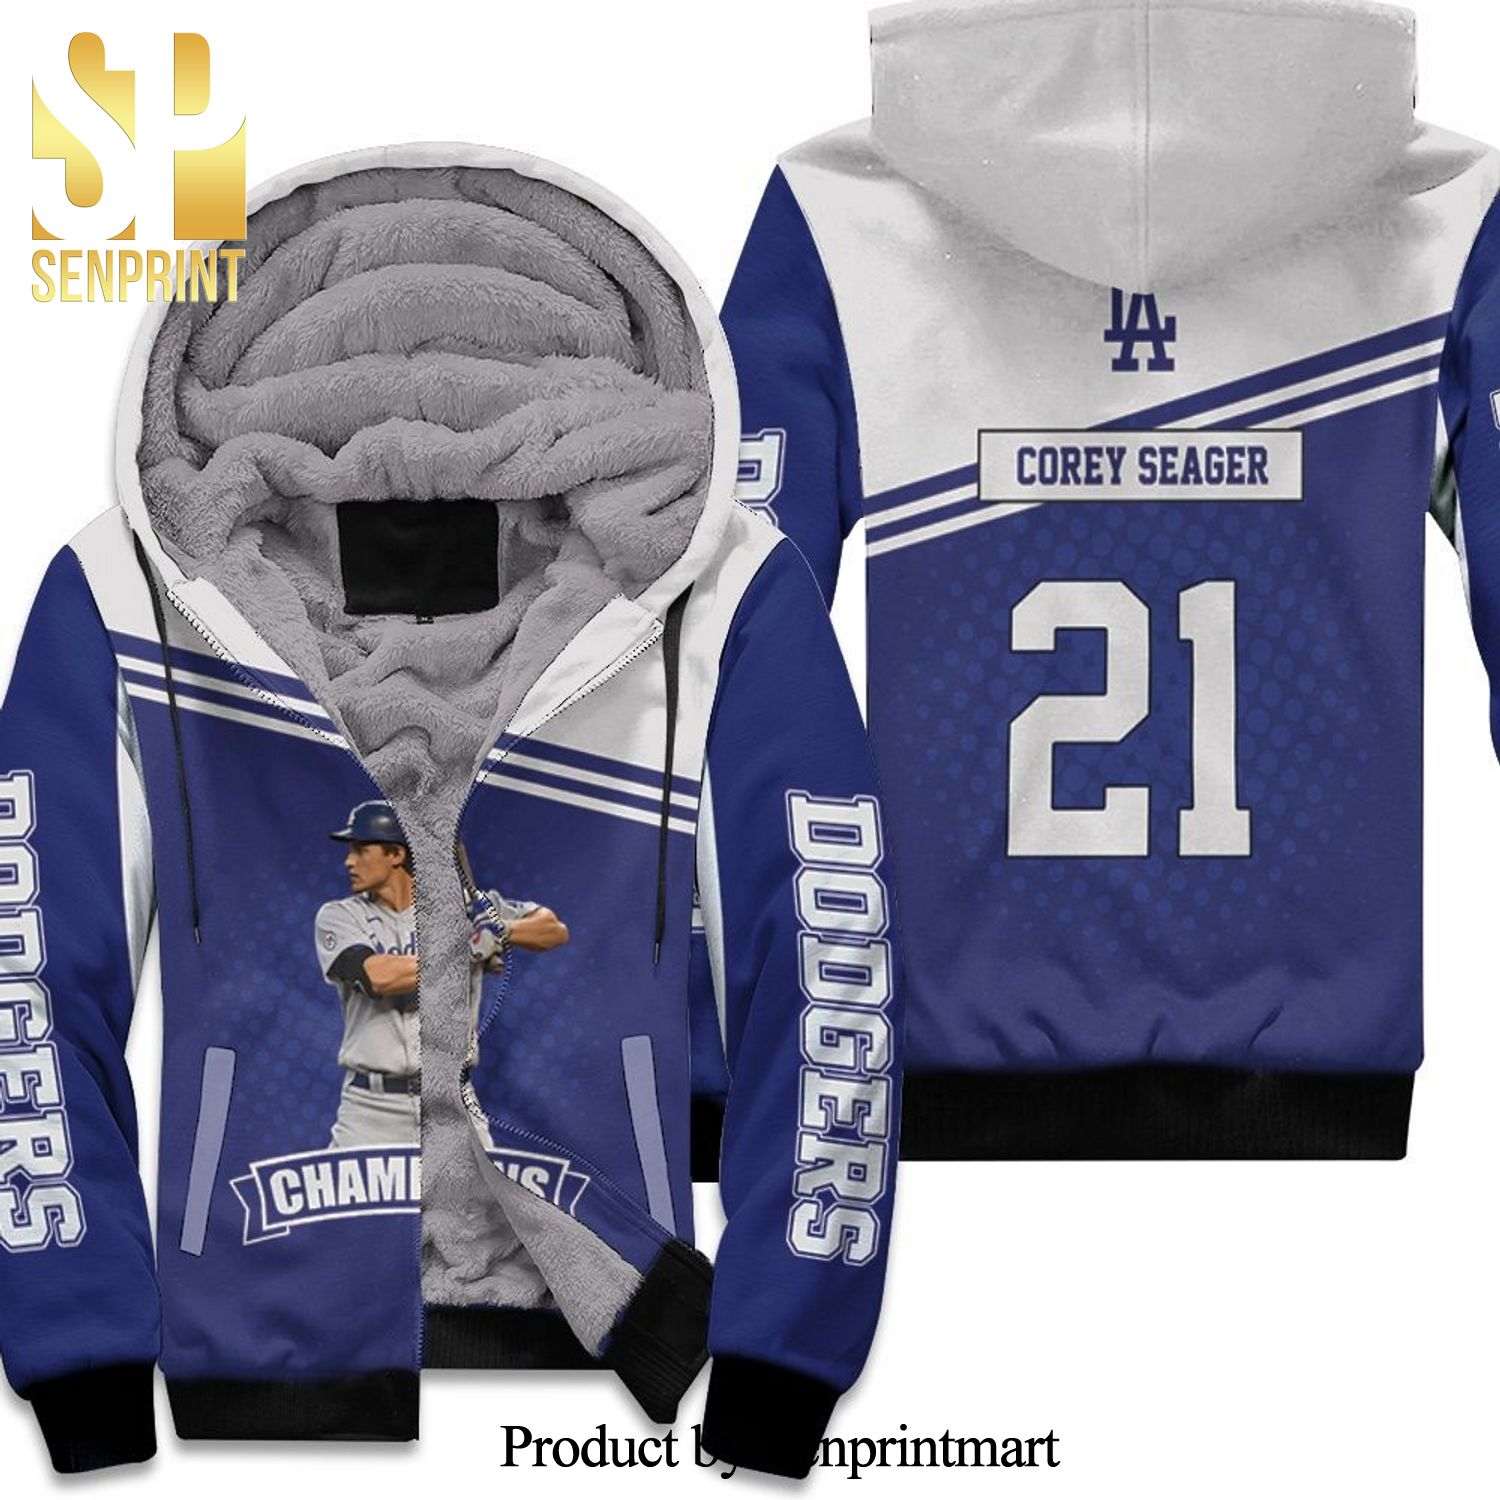 Corey Seager 5 Los Angeles Dodgers Best Outfit Unisex Fleece Hoodie